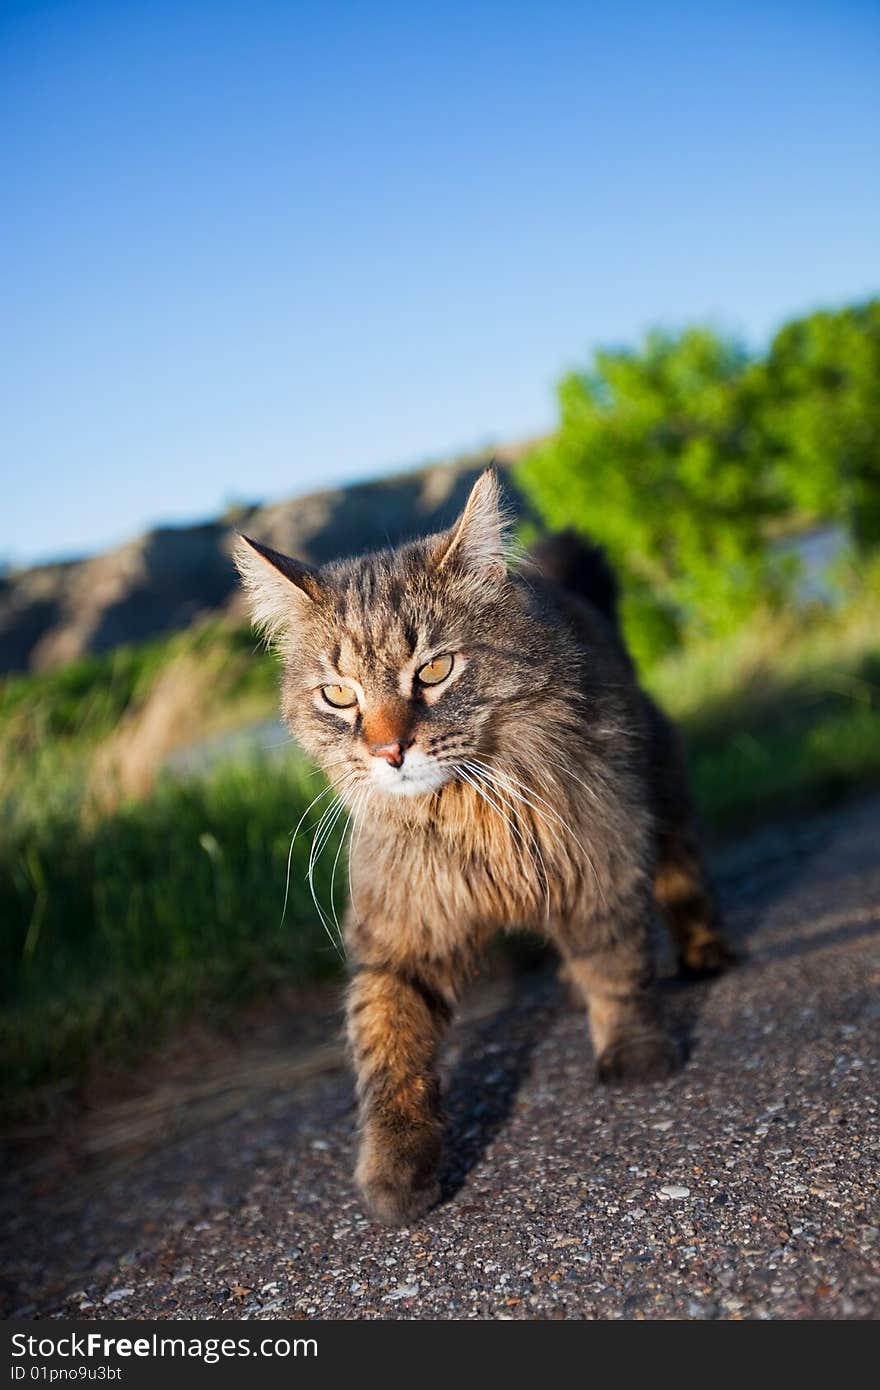 A prowling cat on the hunt. Shallow depth of field. A prowling cat on the hunt. Shallow depth of field.